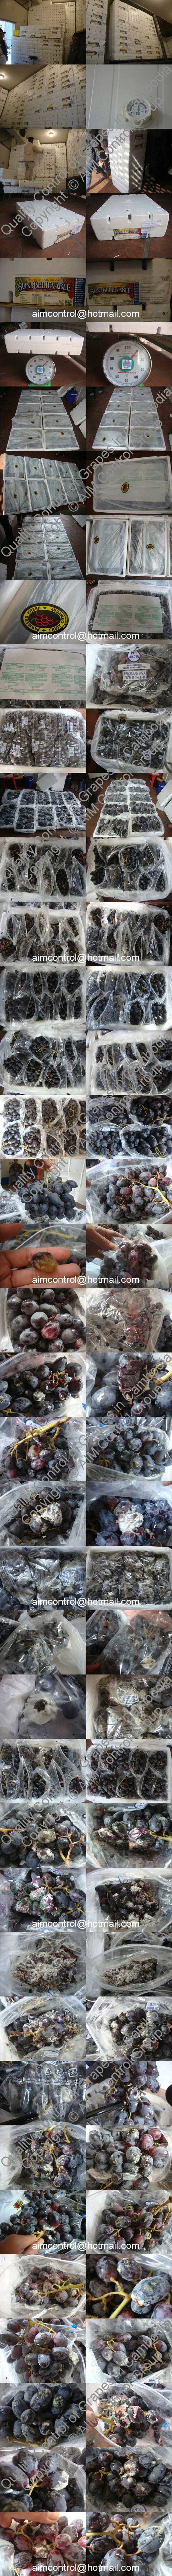 Cargo_damage_inspection_services - for fresh grapes - AIM_Control